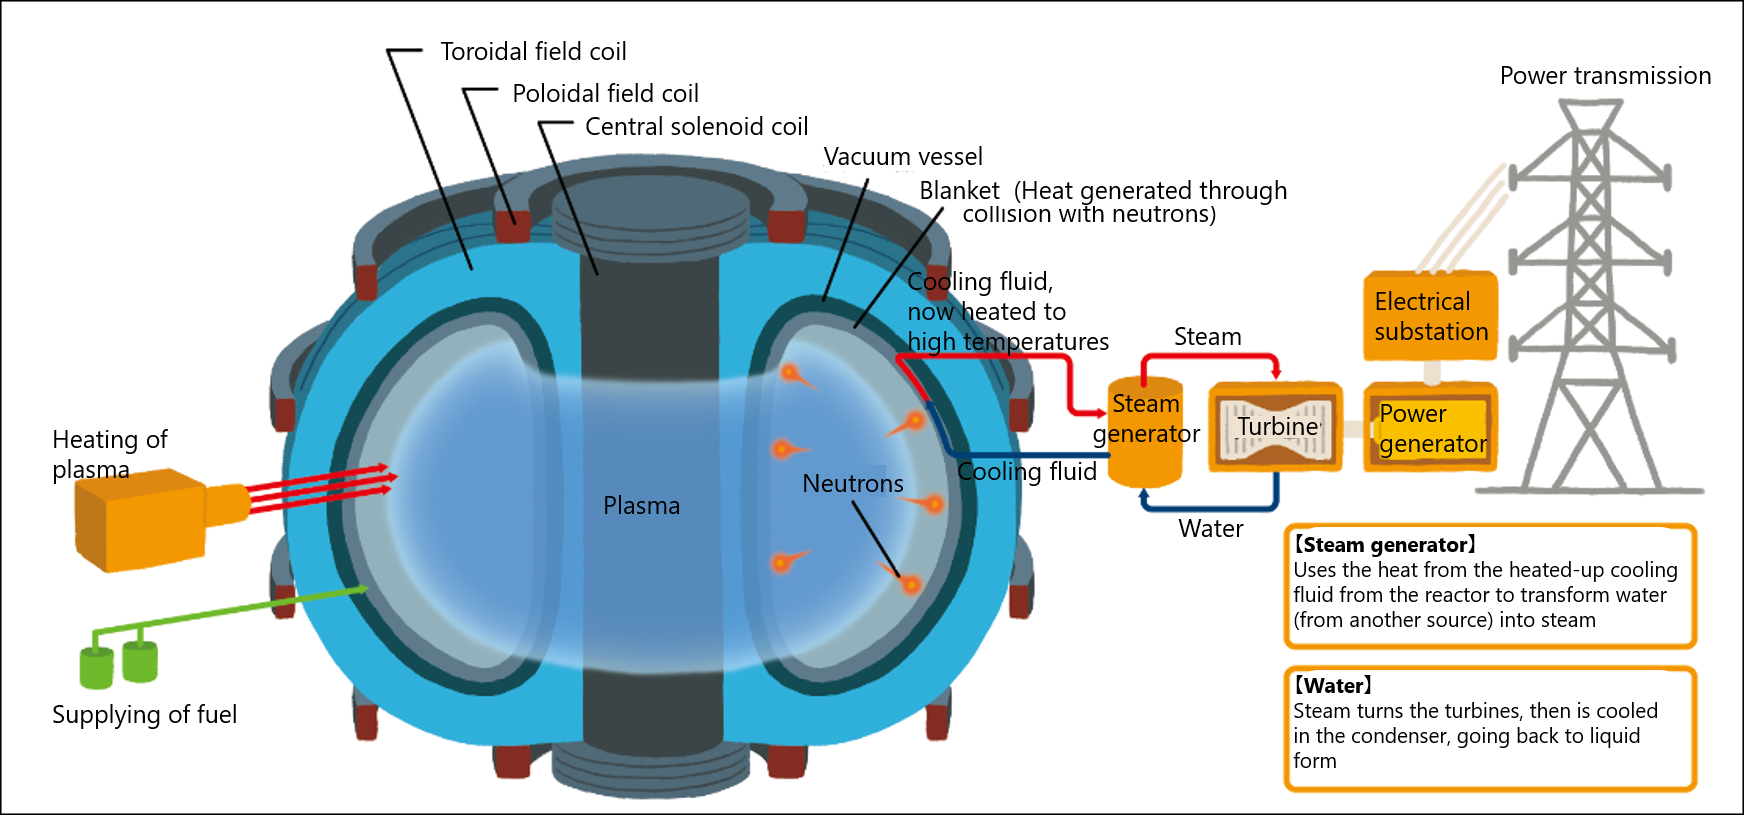 The nuclear fusion process